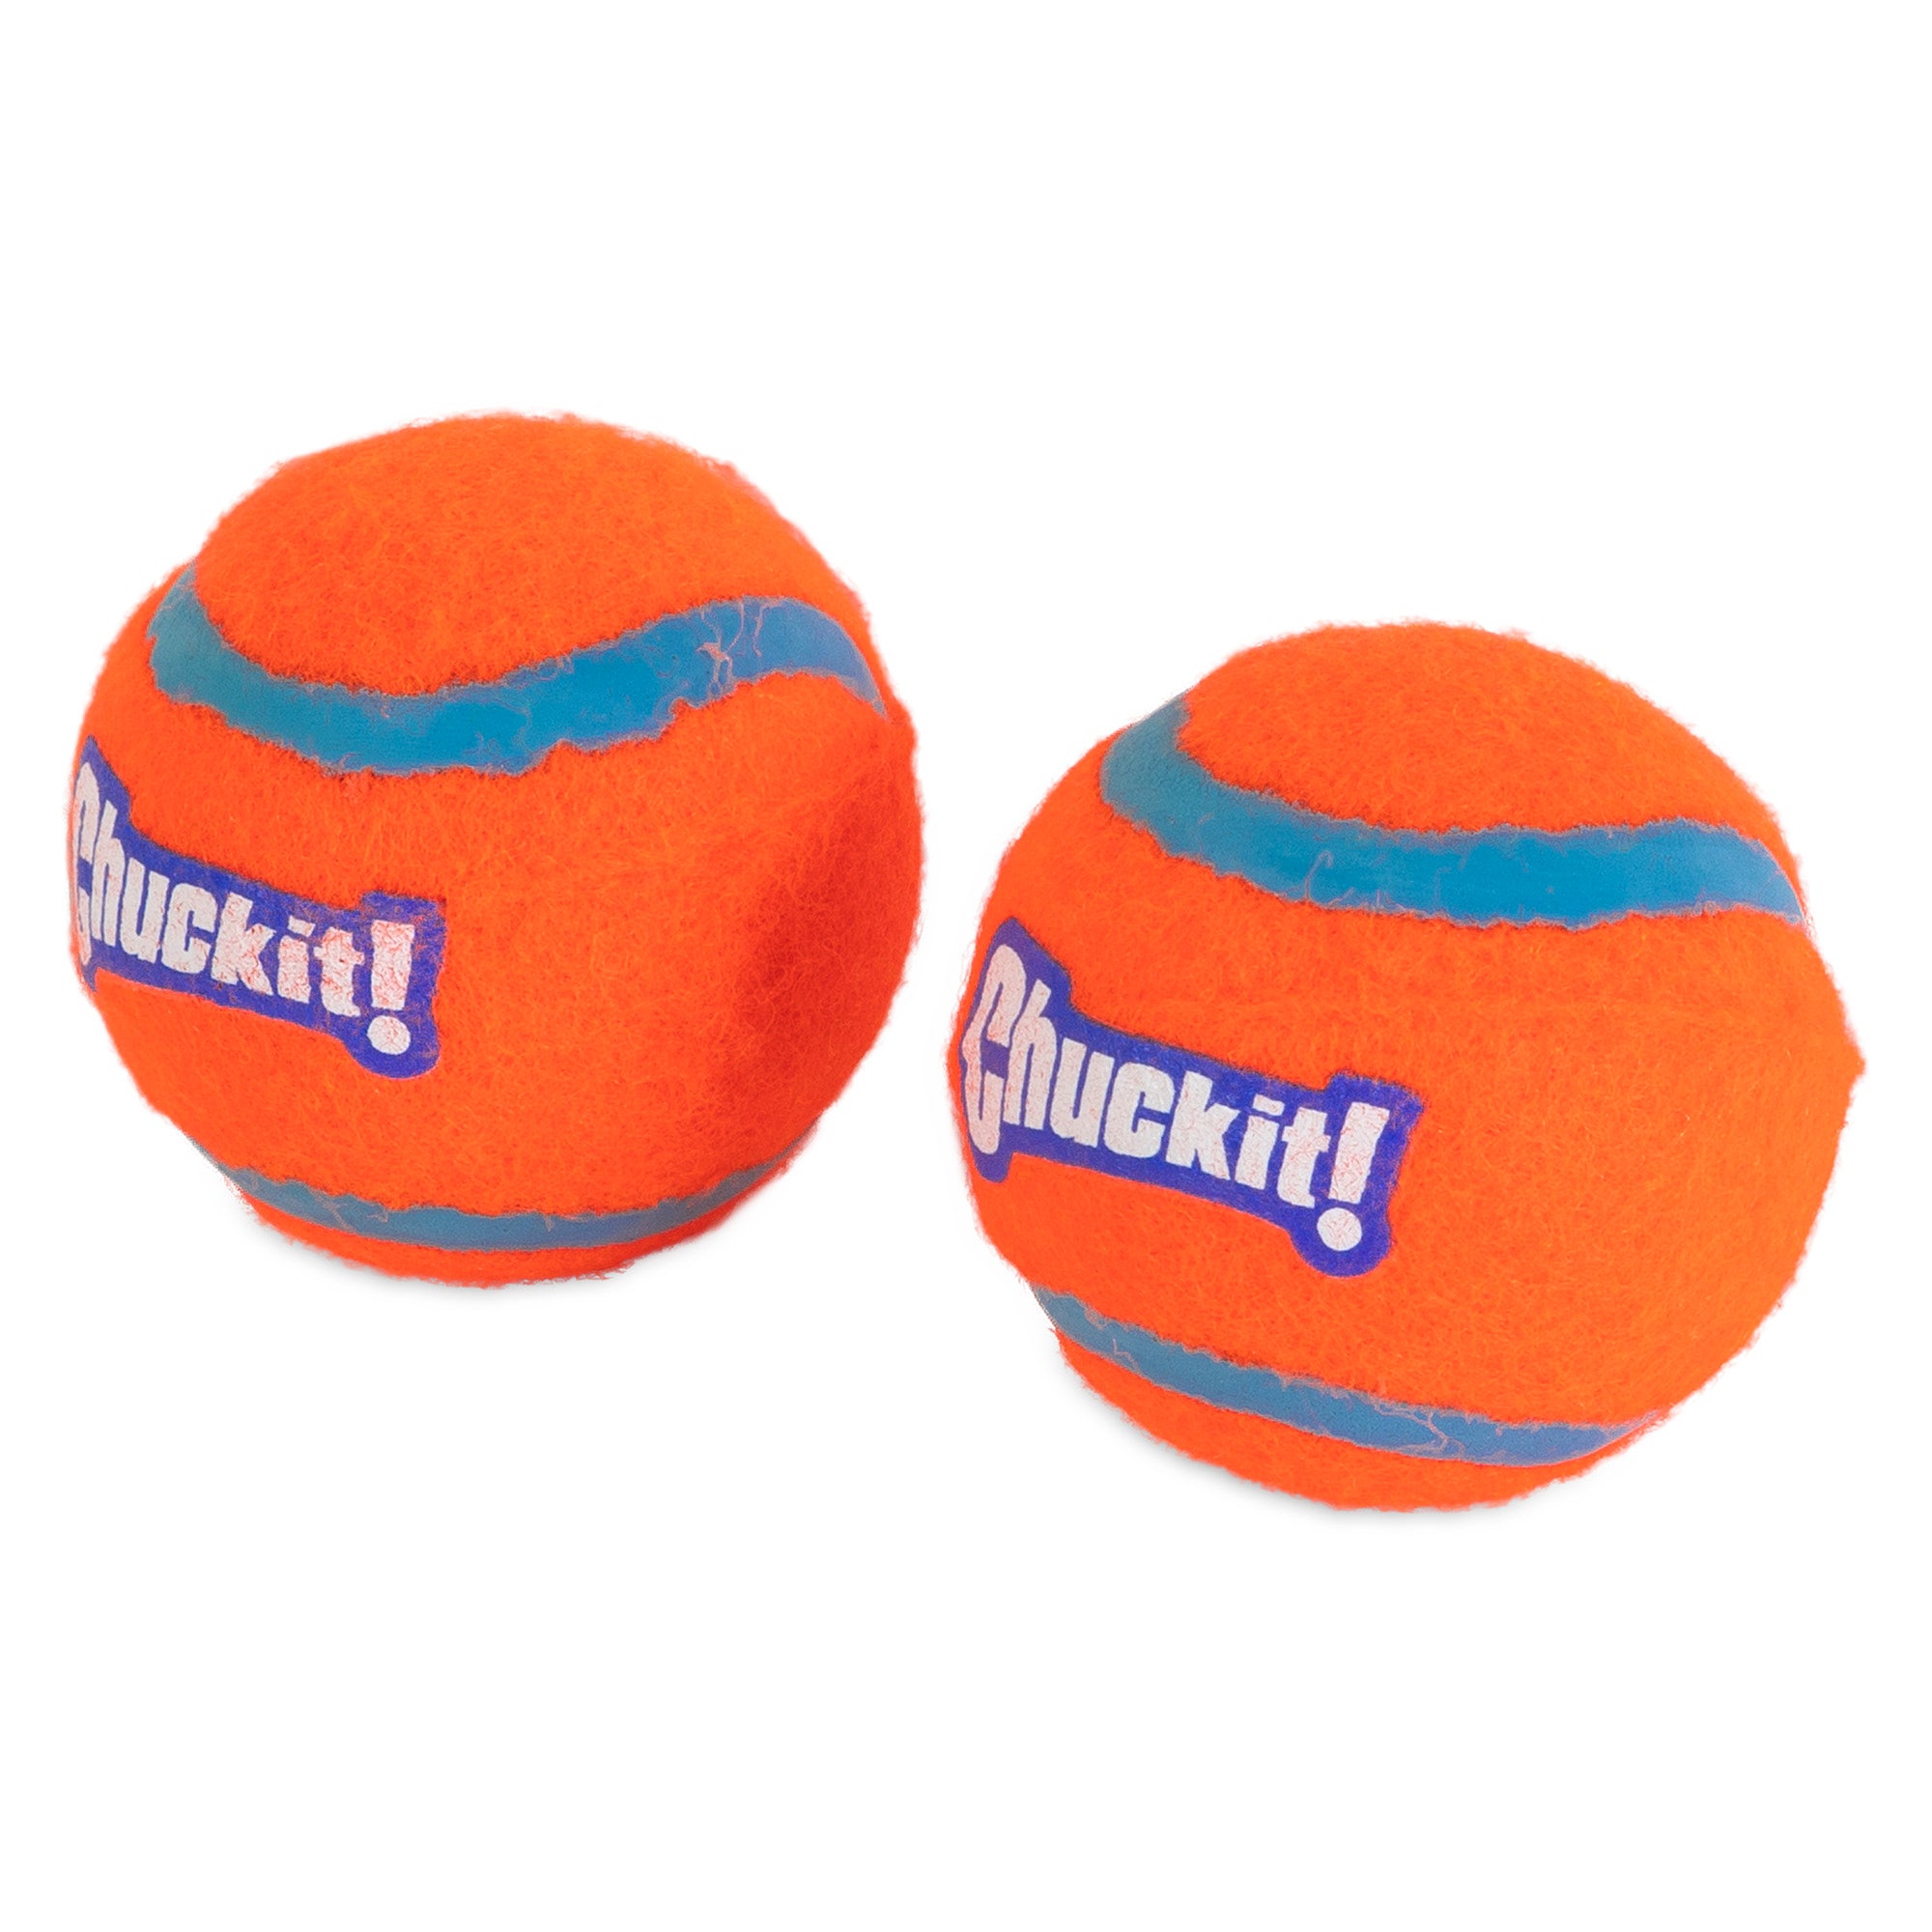 Chuckit! Tennis Balls for Dogs